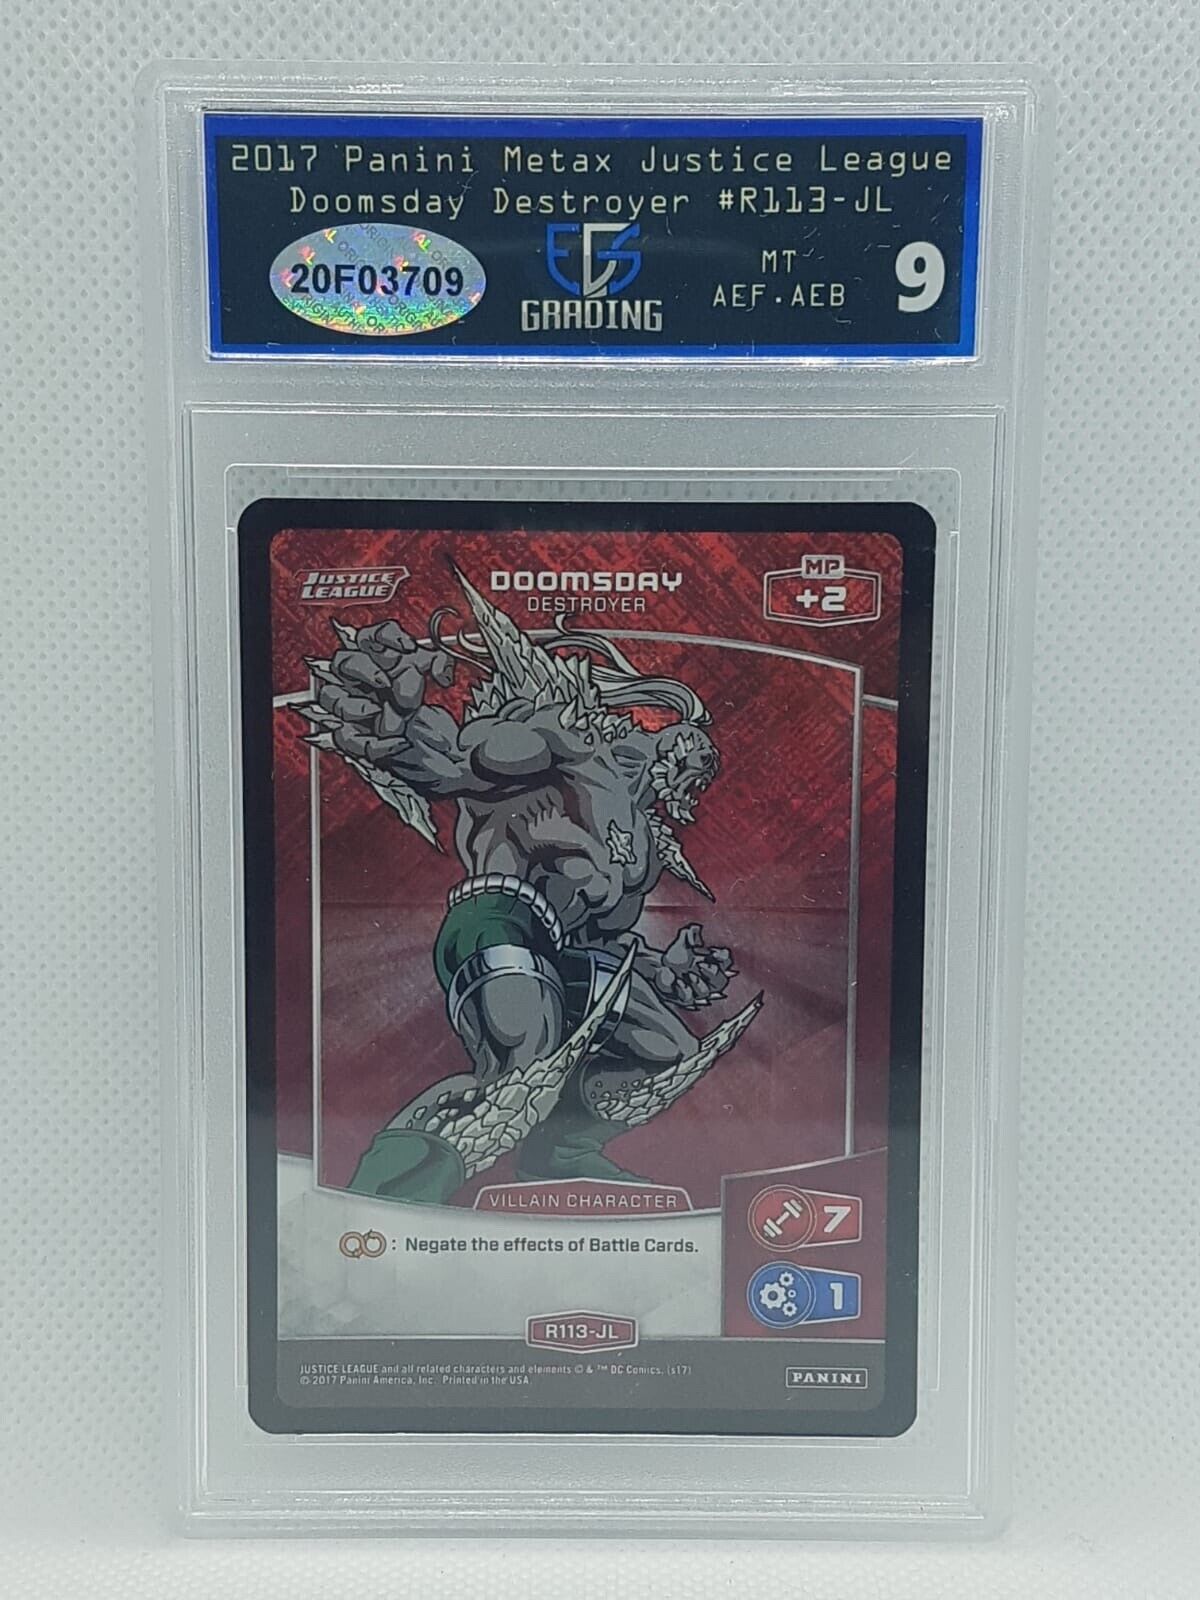 2017 Panini Justice League Doomsday Destroyer HOLO FOIL Rare EGS 9 Graded DC 1/1